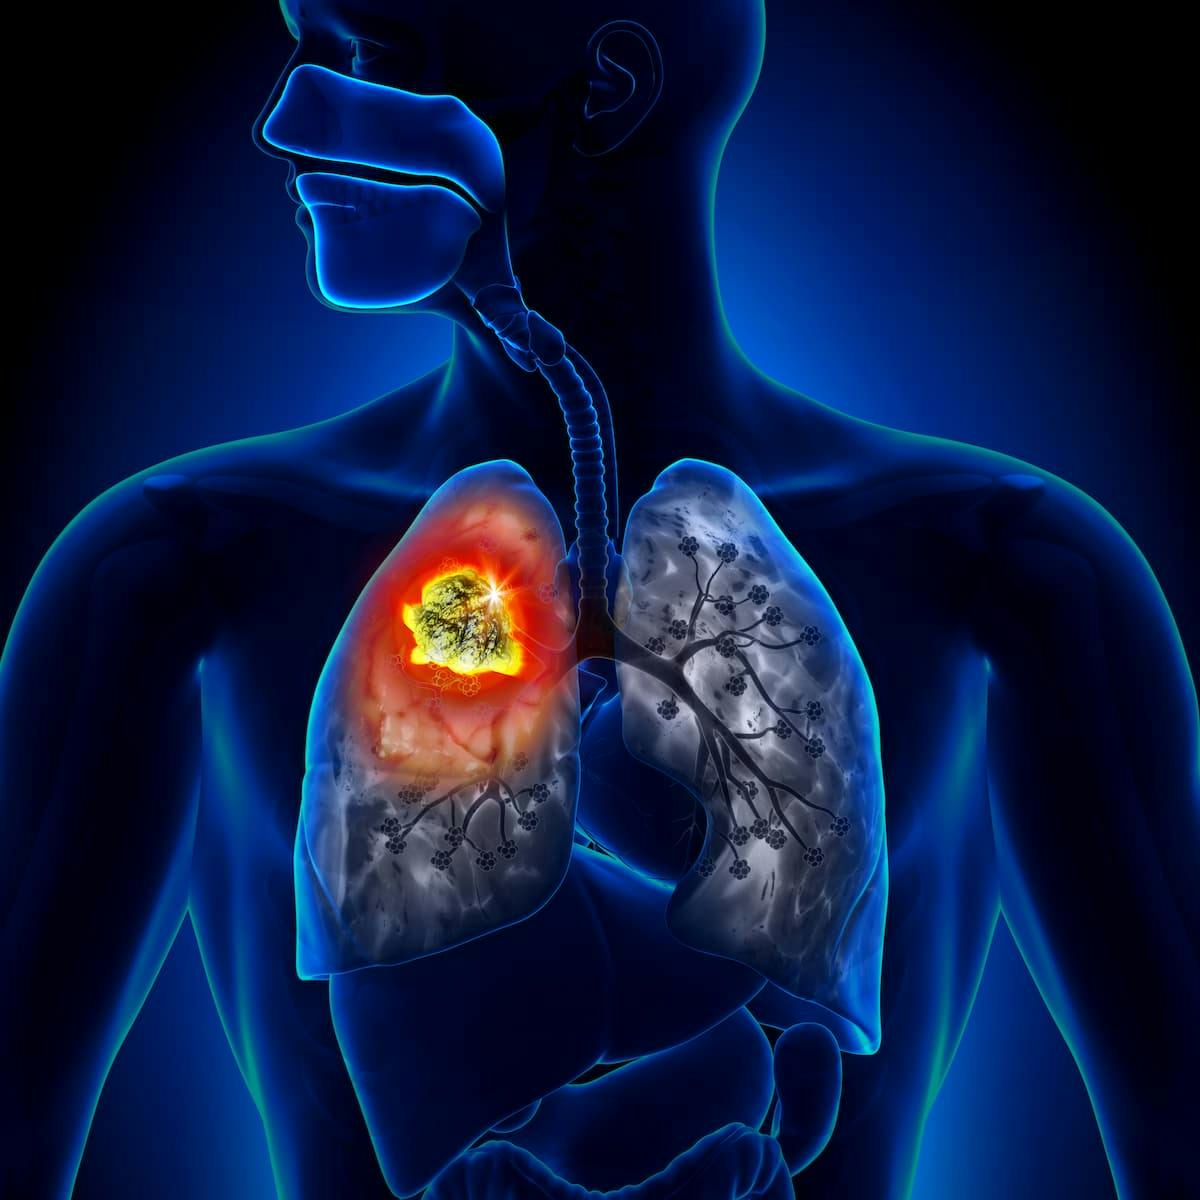 “By moving this [pembrolizumab]-based regimen into earlier stages of [NSCLC], we may be able to significantly reduce the risk of recurrence for these patients,” according to the manufacturers of pembrolizumab.